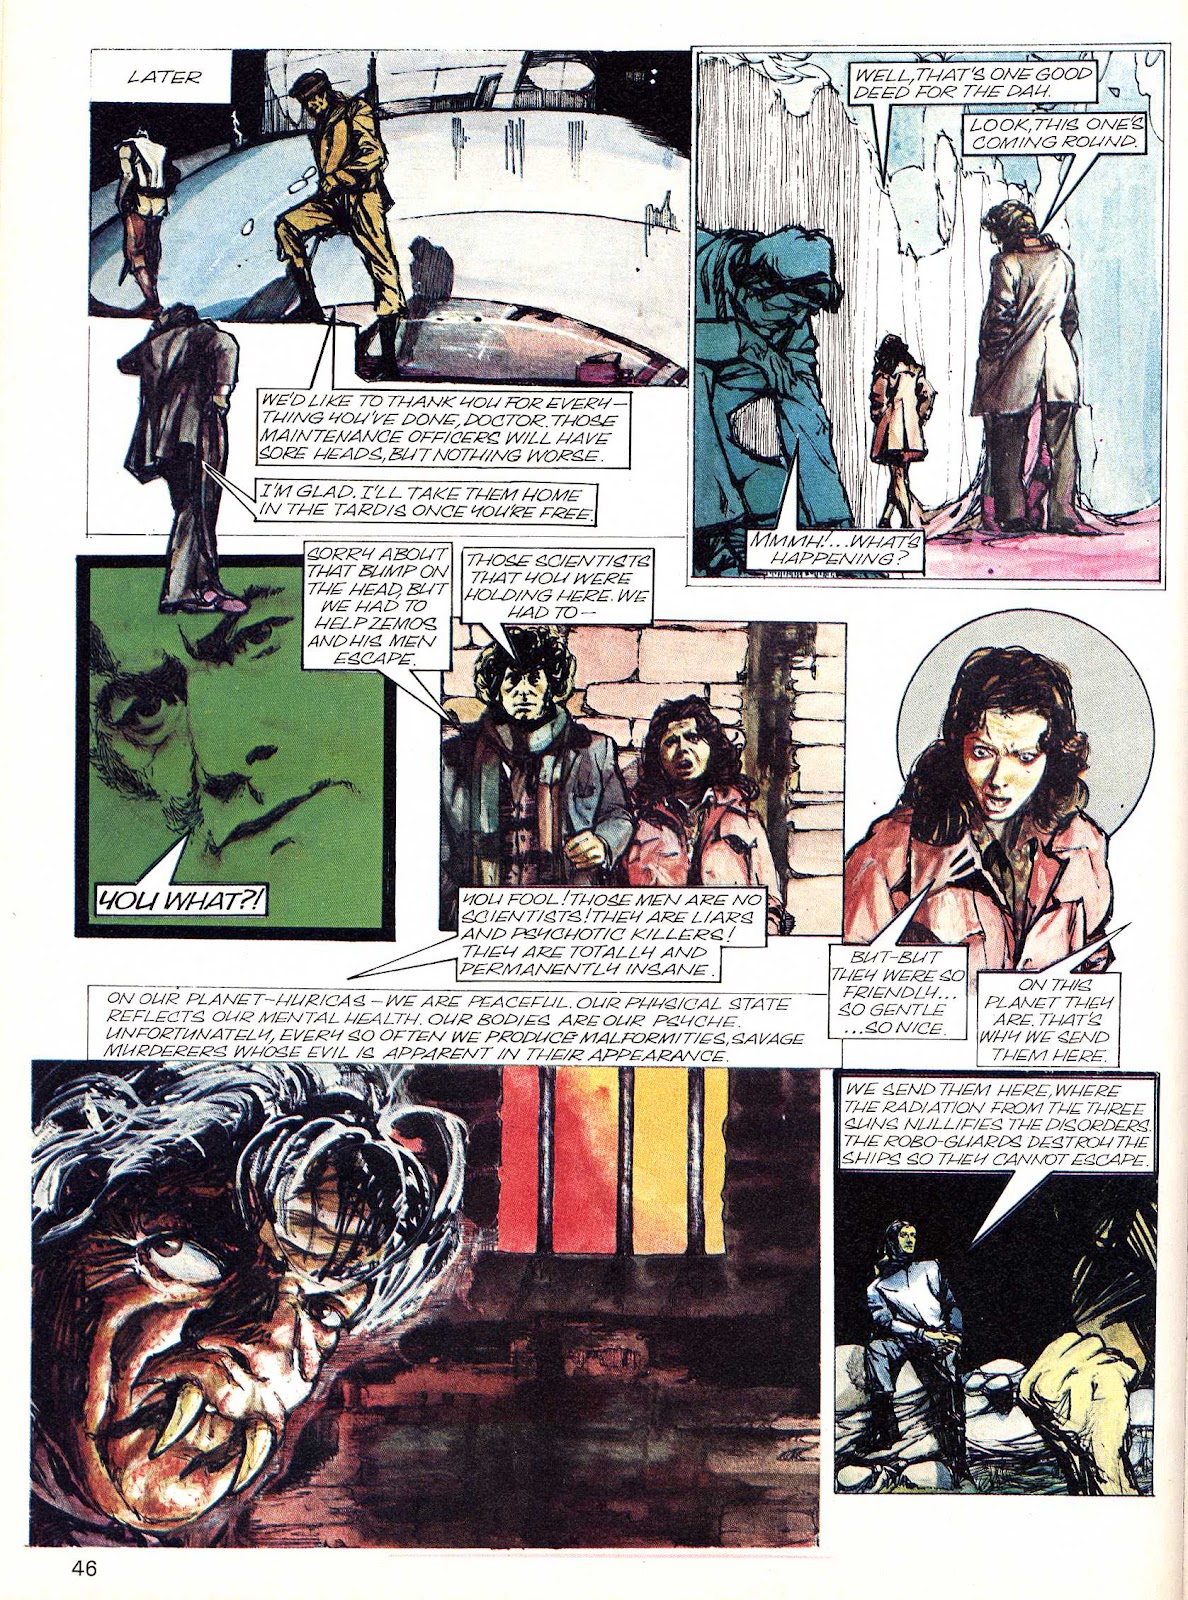 Doctor Who Annual issue 1978 - Page 11